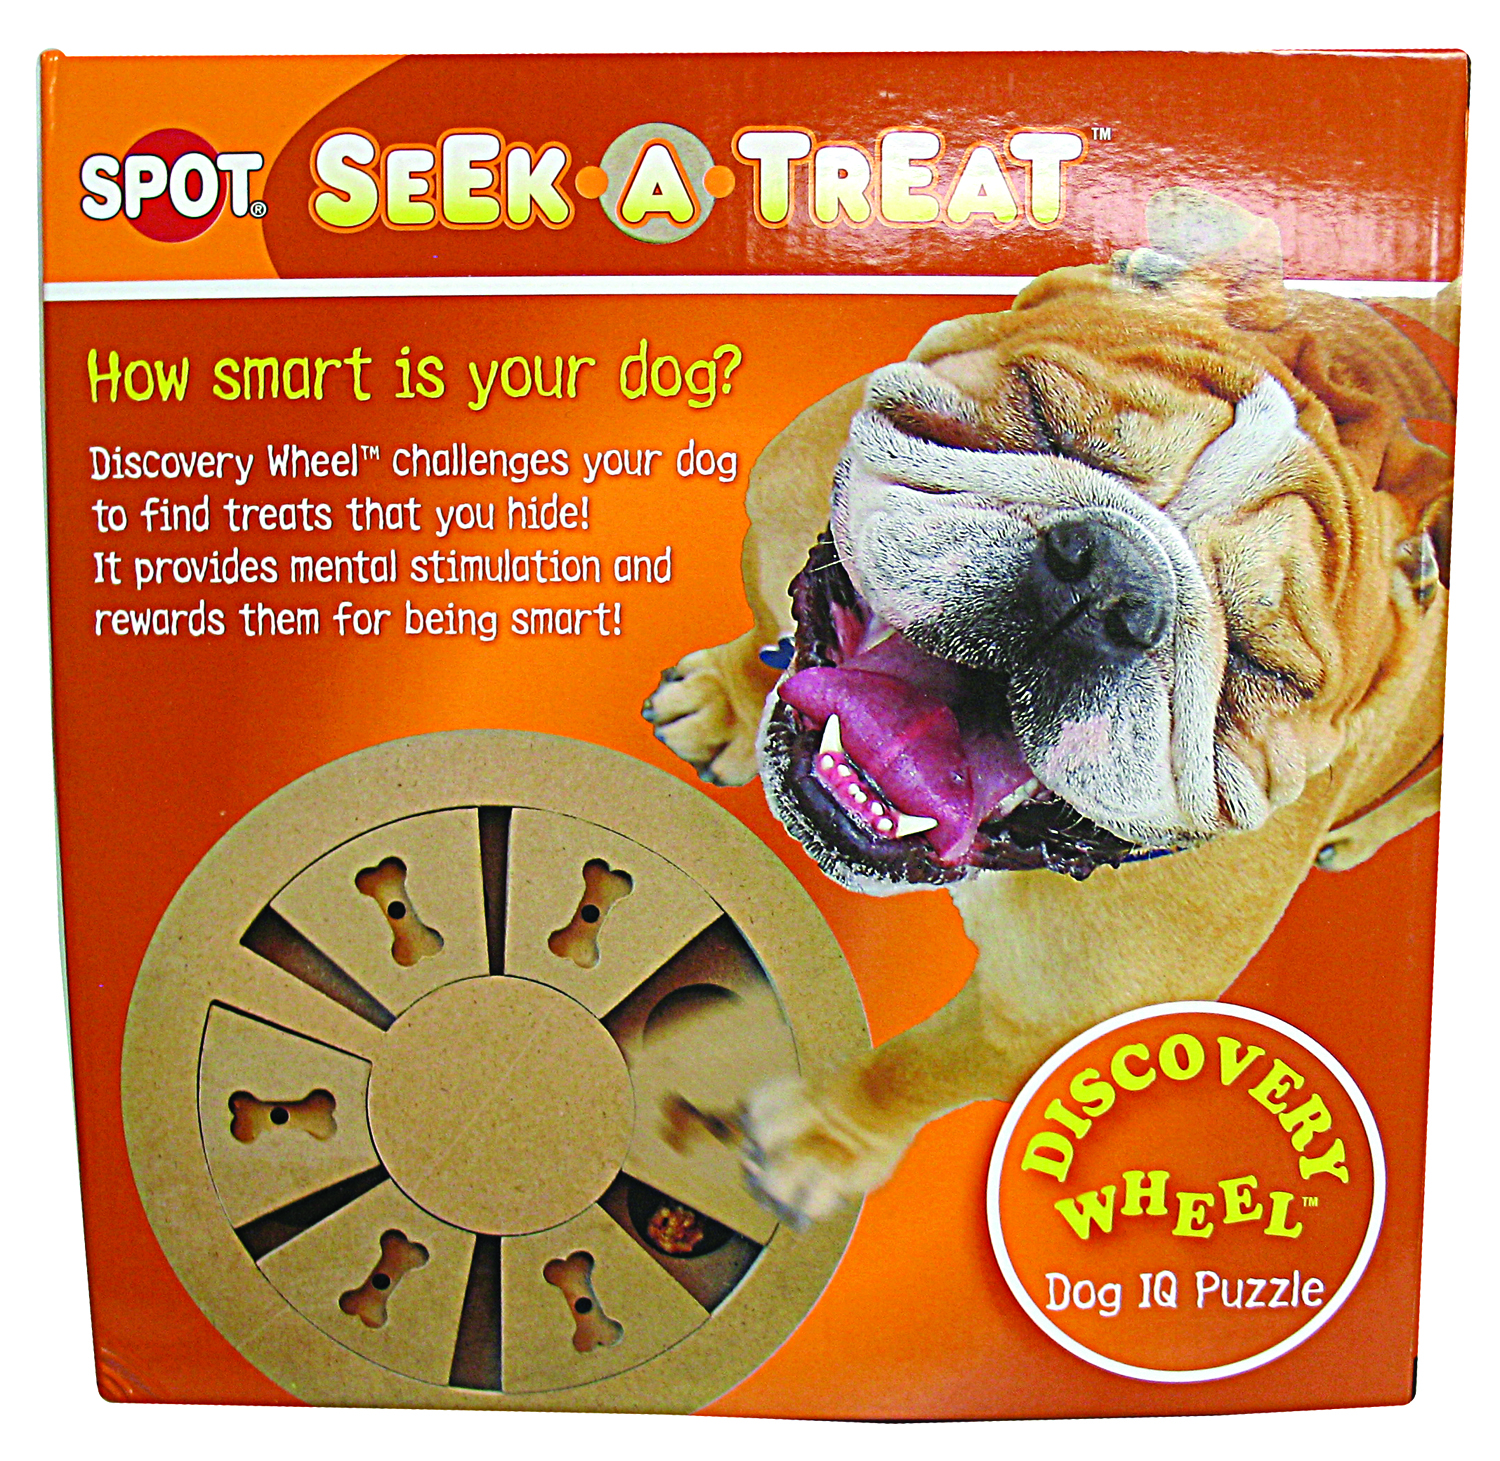 SEEK-A-TREAT DISCOVERY WHEEL PUZZLE